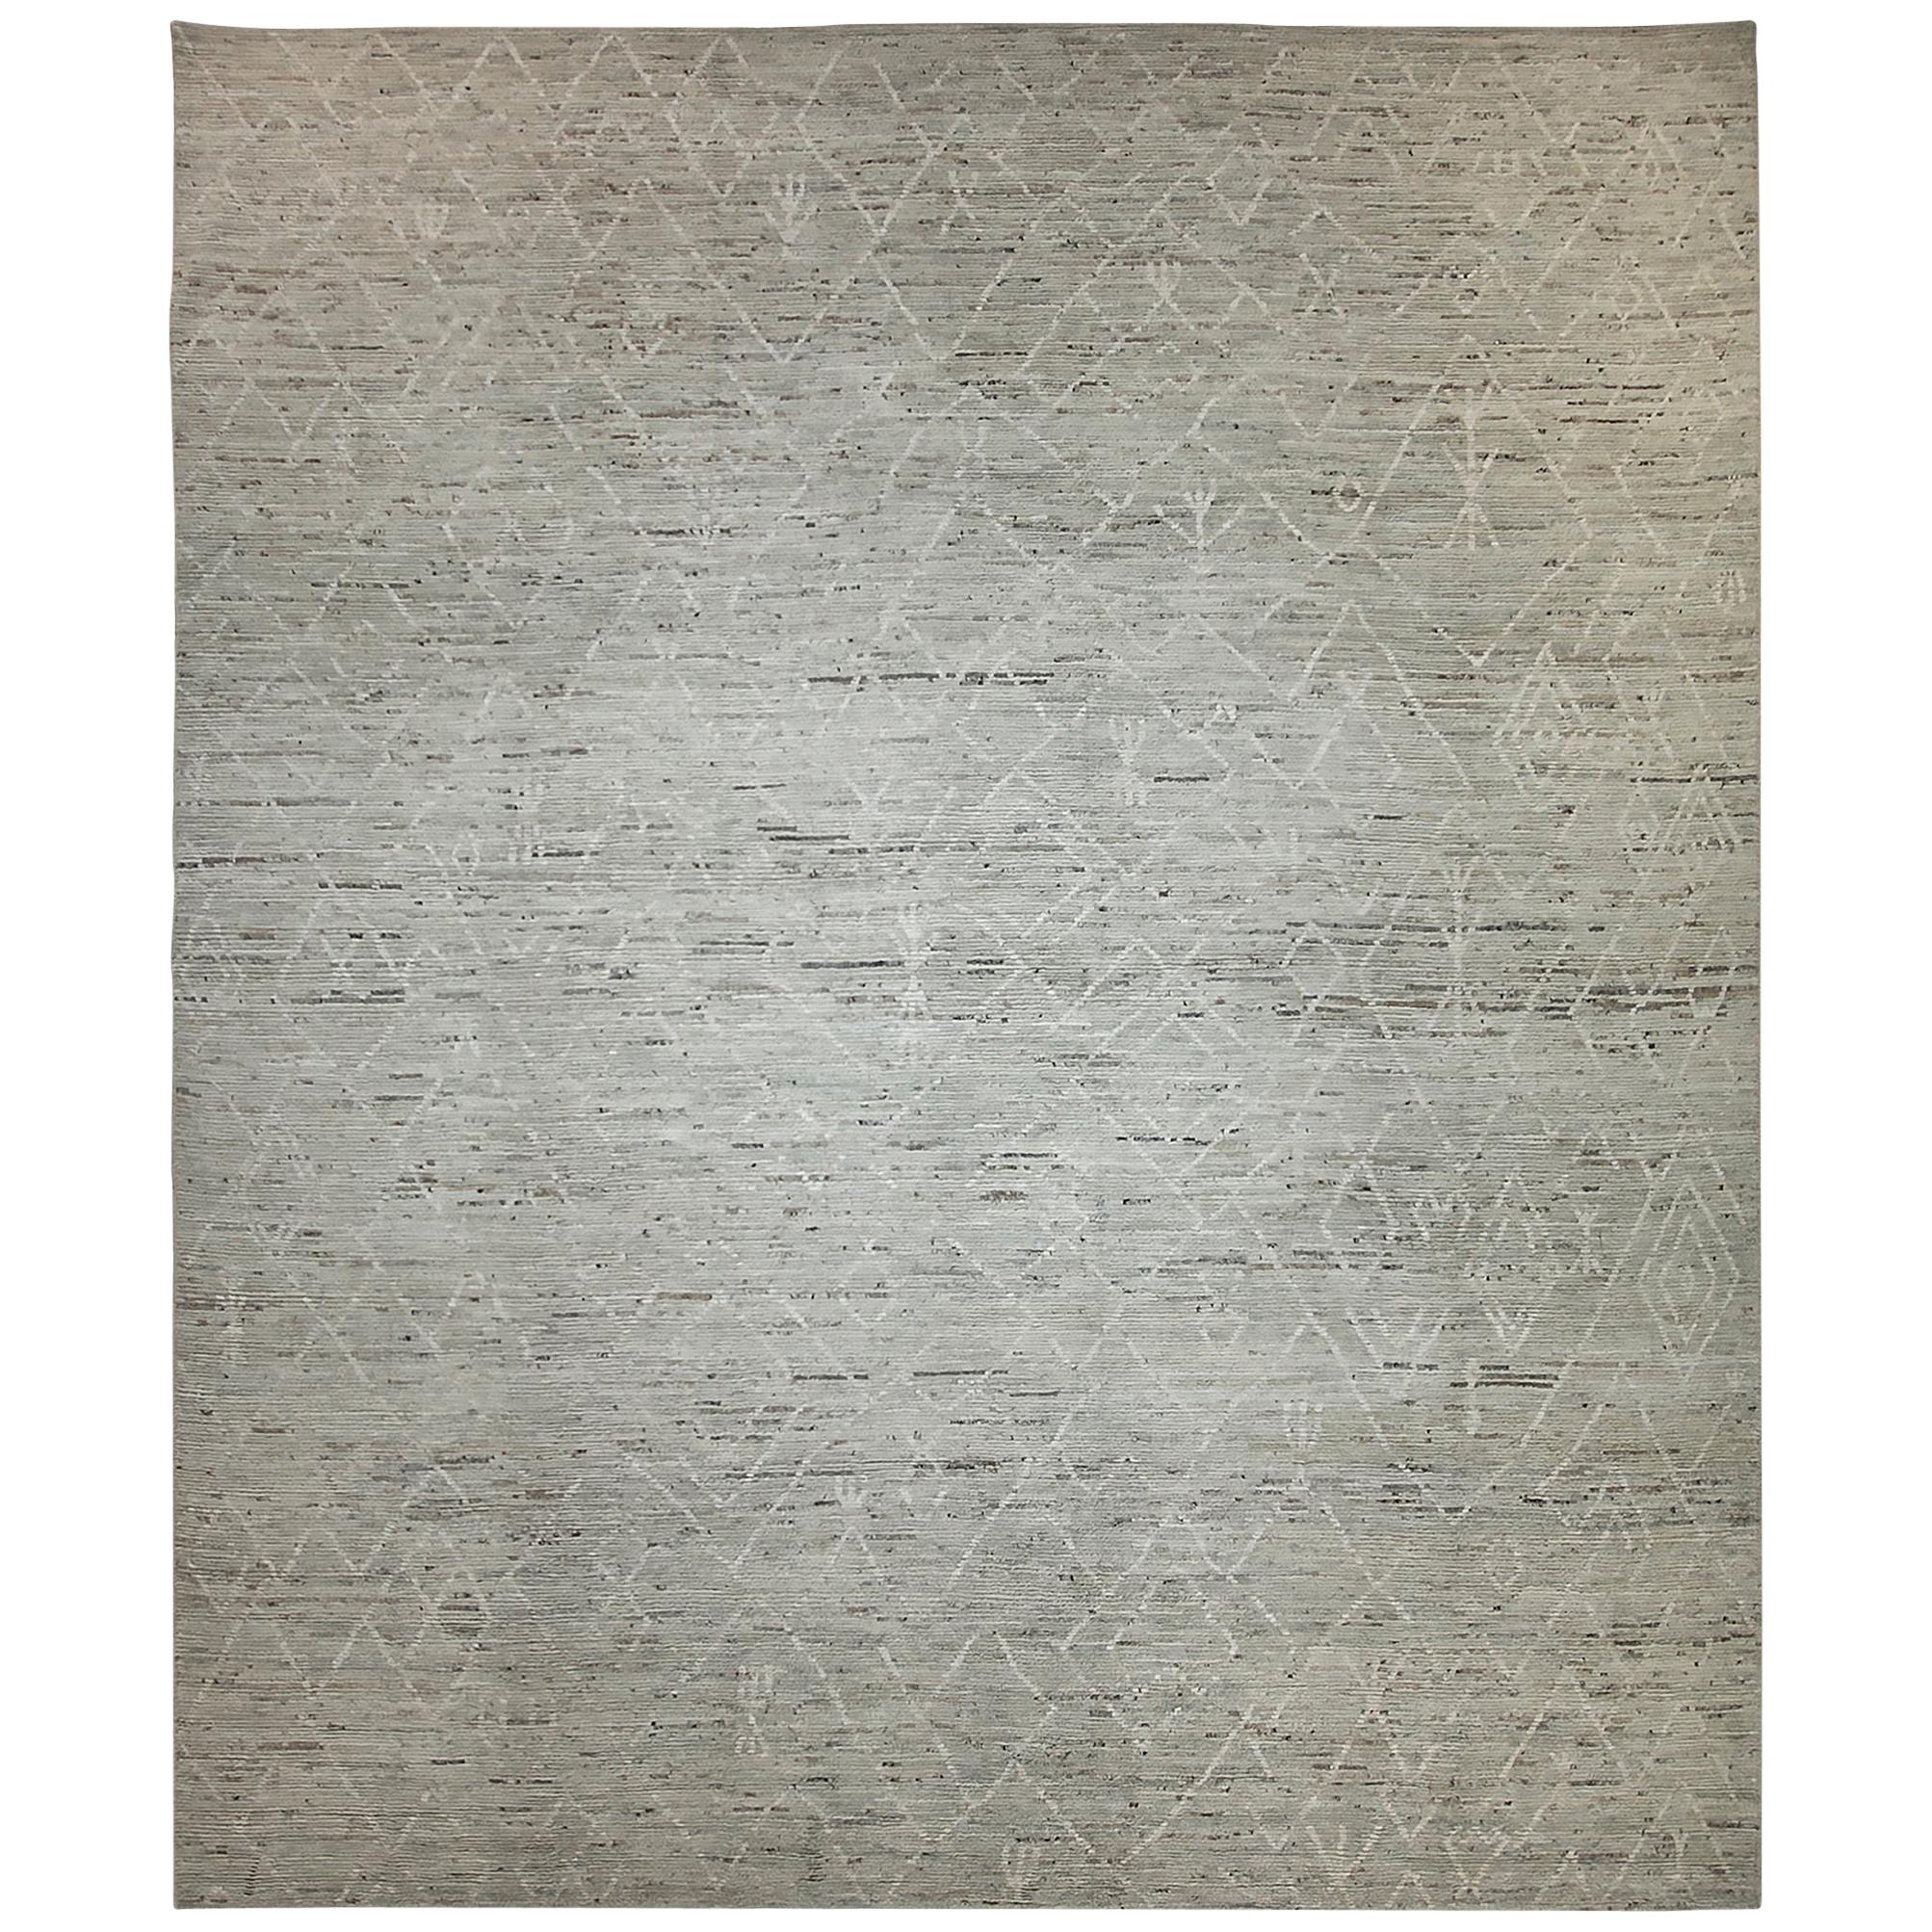 Nazmiyal Collection Modern Moroccan Style Rug. 13 ft 4 in x 15 ft 8 in